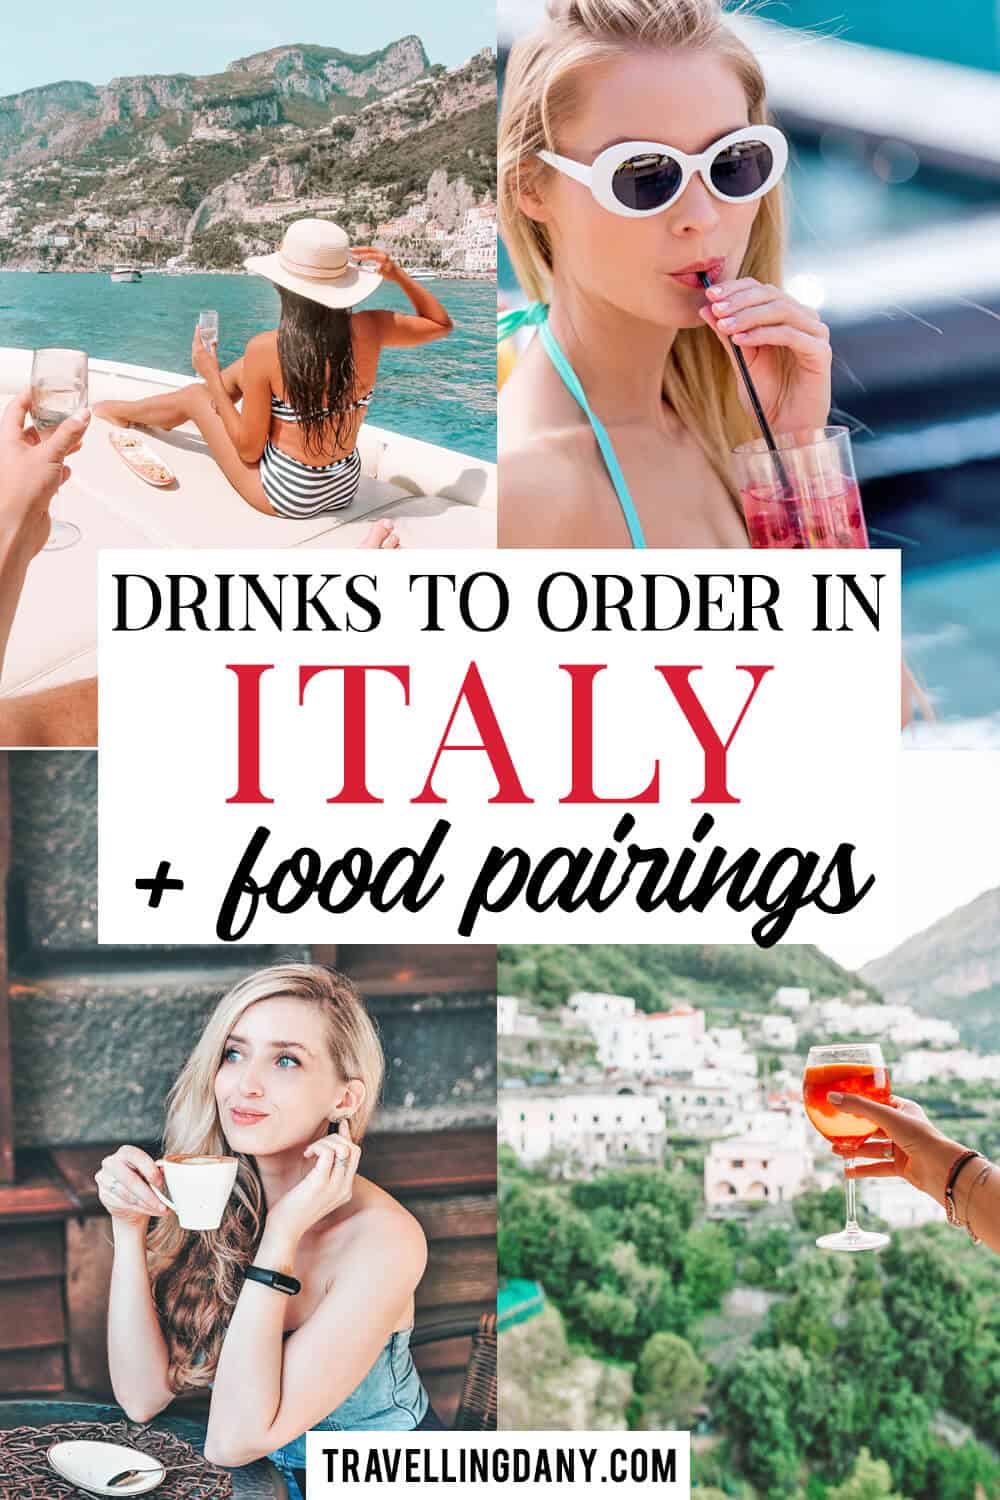 Discover the very best cocktails and drinks to order in Italy, with the help of a local! This ultimate drinking guide also covers the best food pairings for Italian wine and drinks. But there's much more!